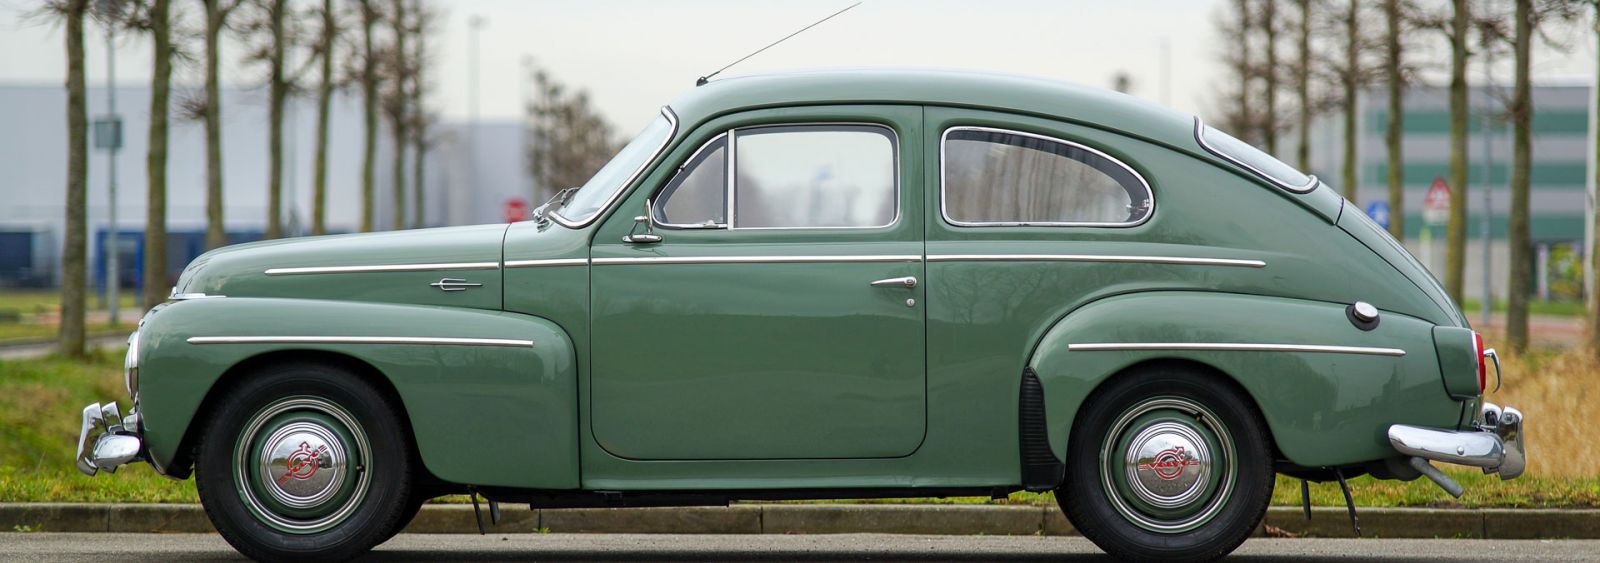 Volvo Pv 544 Sport 1958 Welcome To Classicargarage